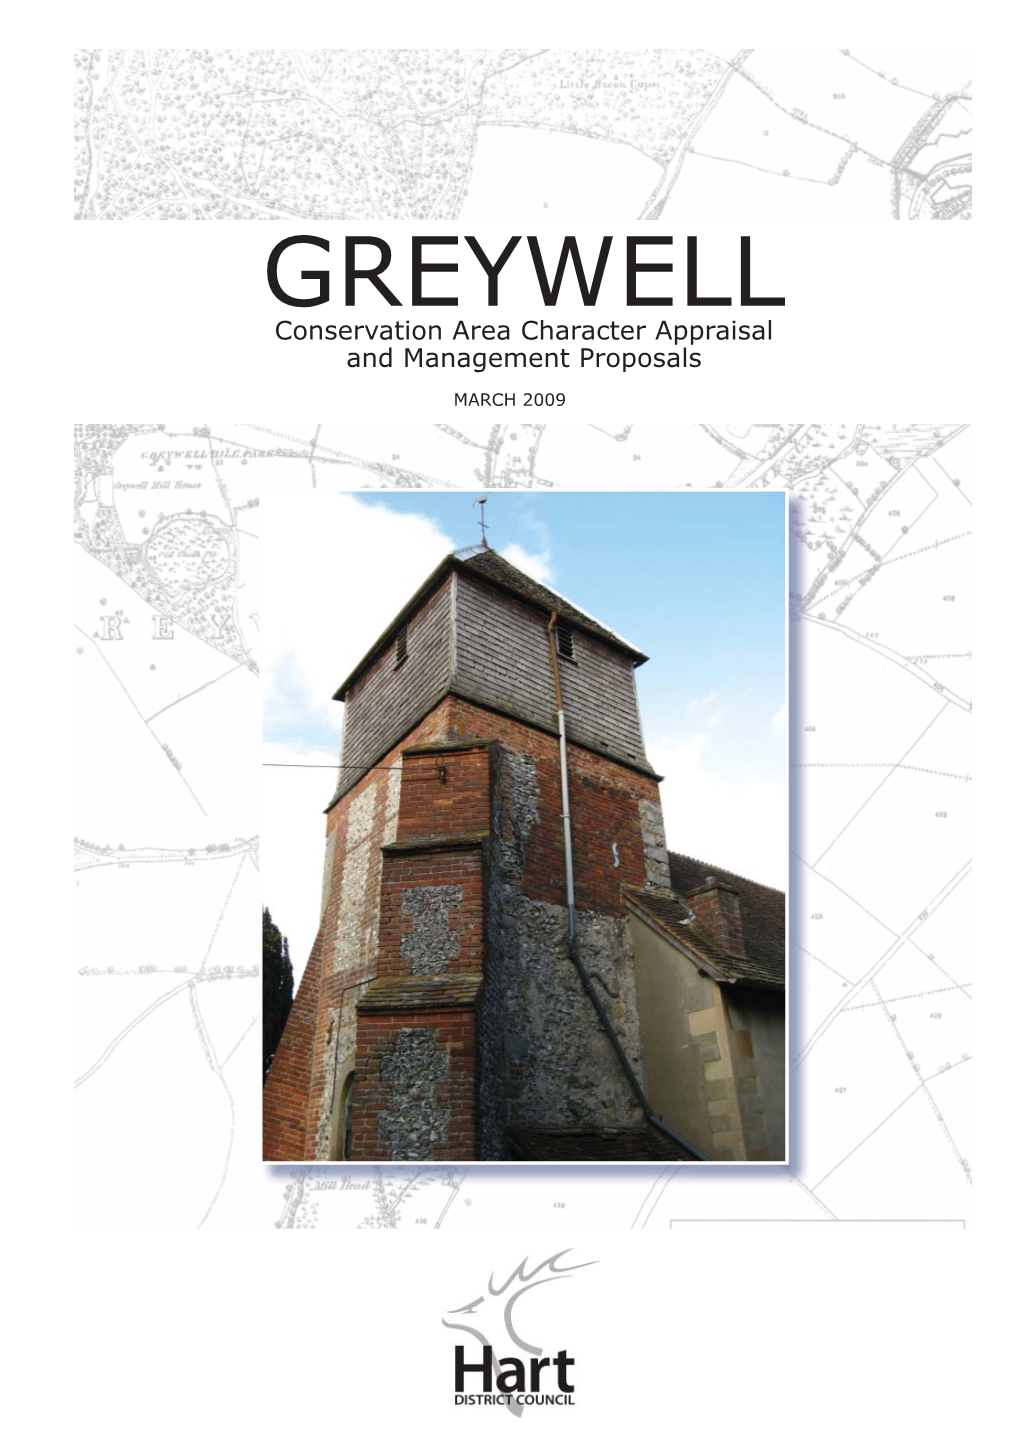 GREYWELL Conservation Area Character Appraisal and Management Proposals